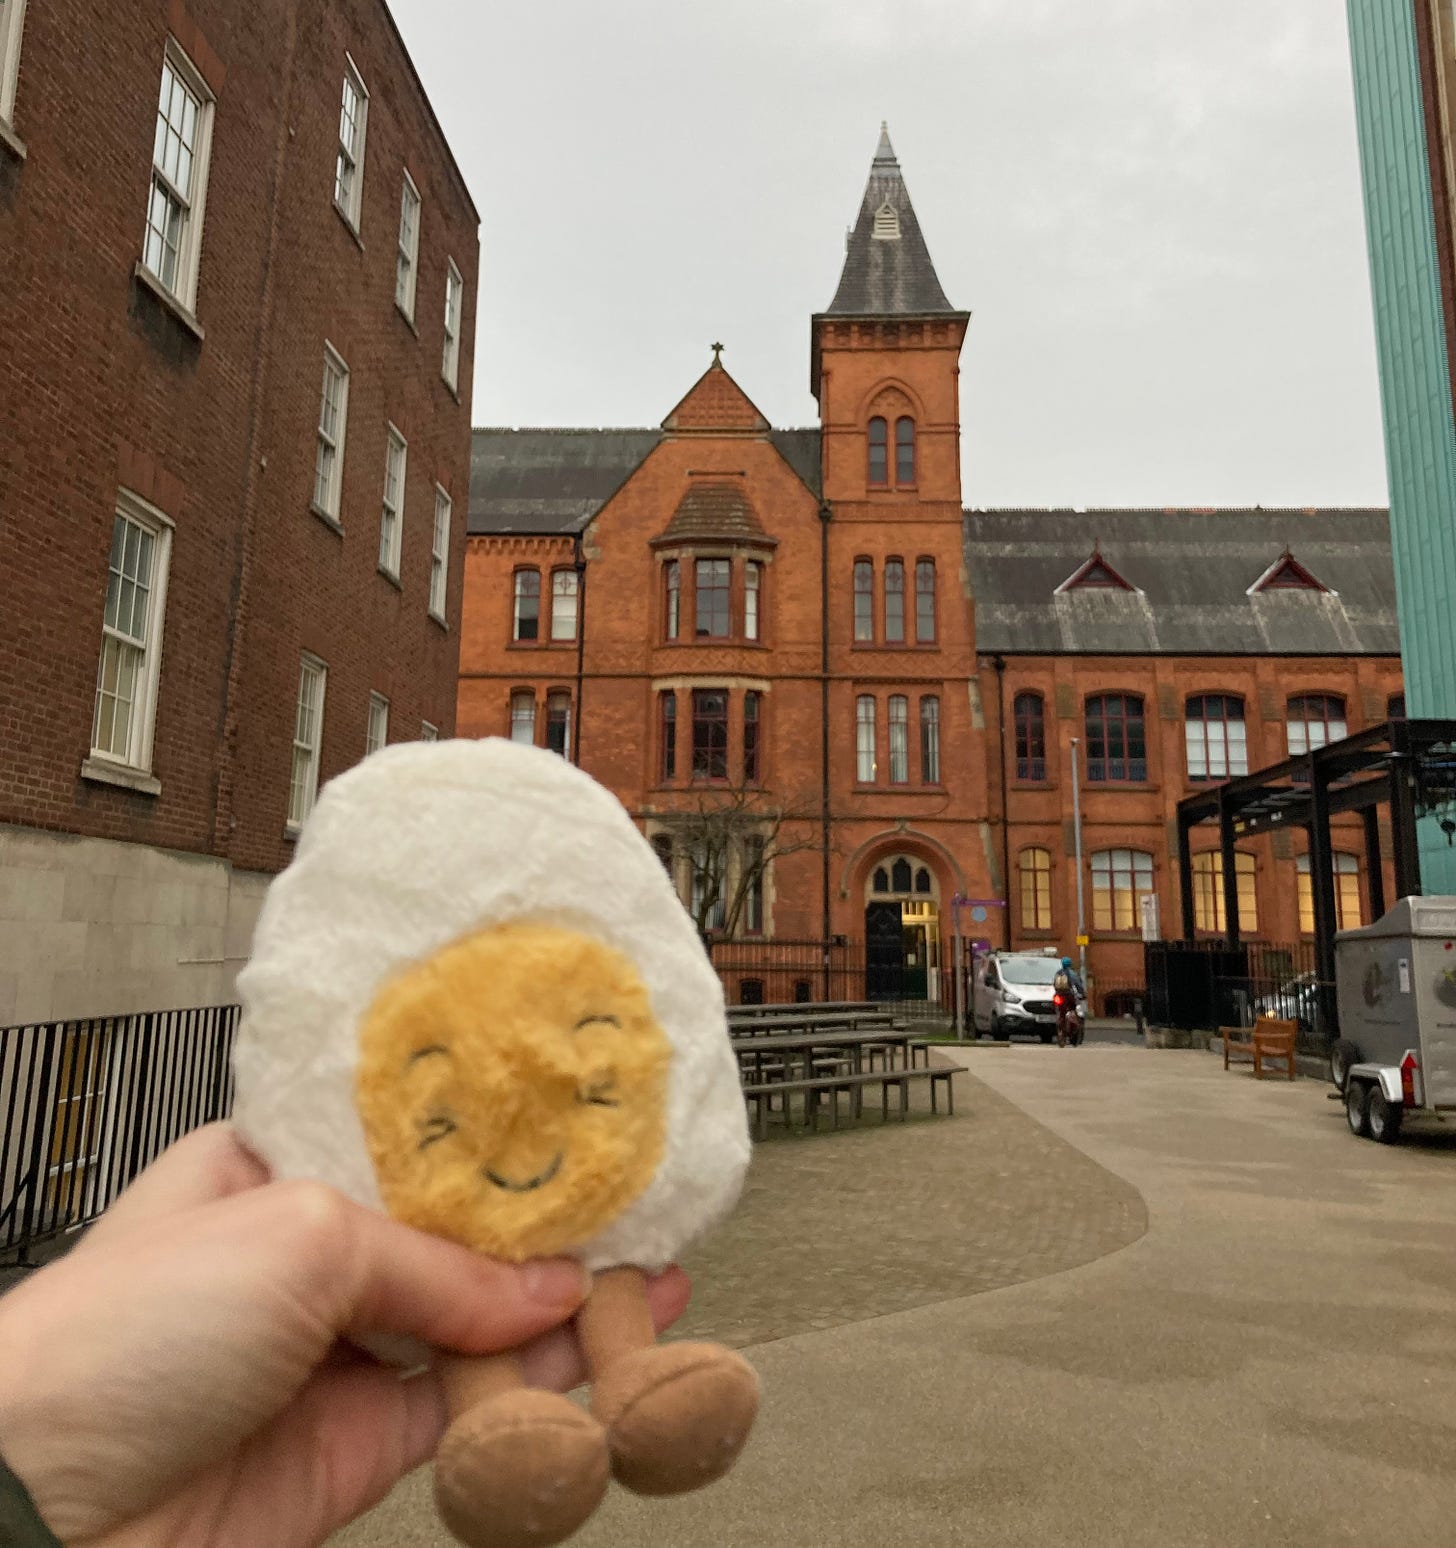 photograph of Dippy the soft toy egg in front of a red brick university building against a dull grey sky